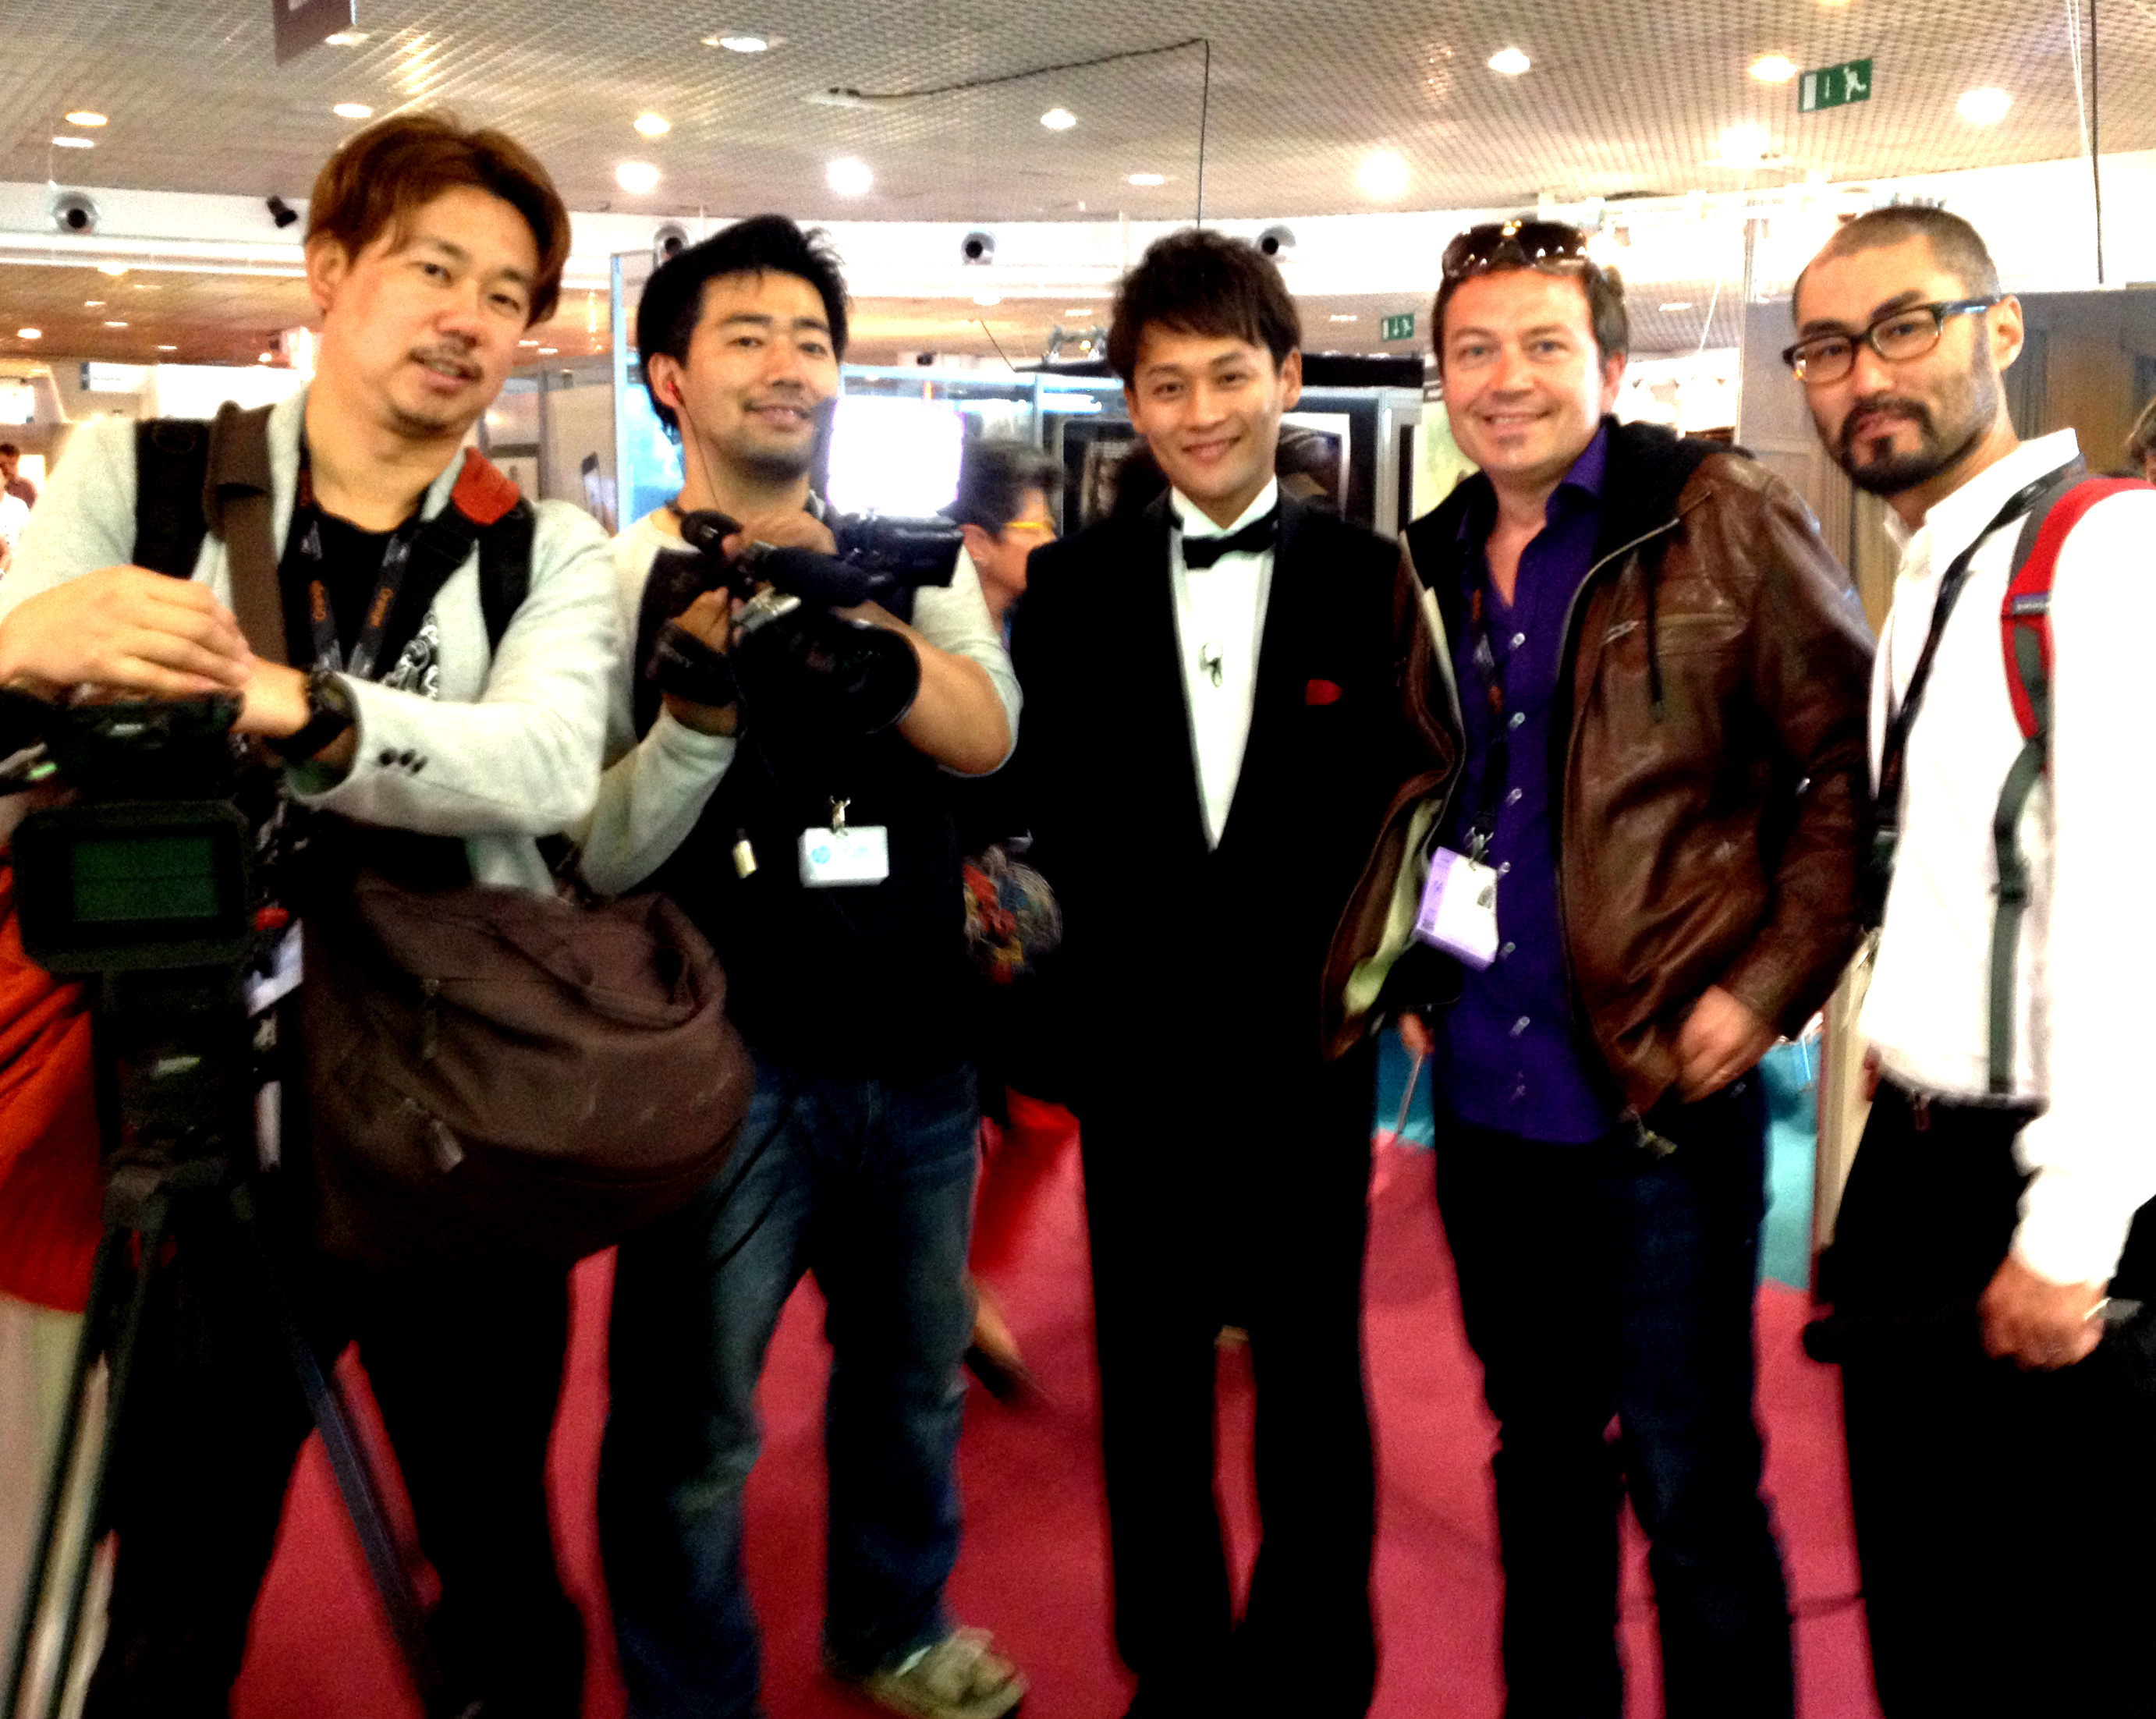 Interview by Japan TV (Cannes Filmfestival 2012)